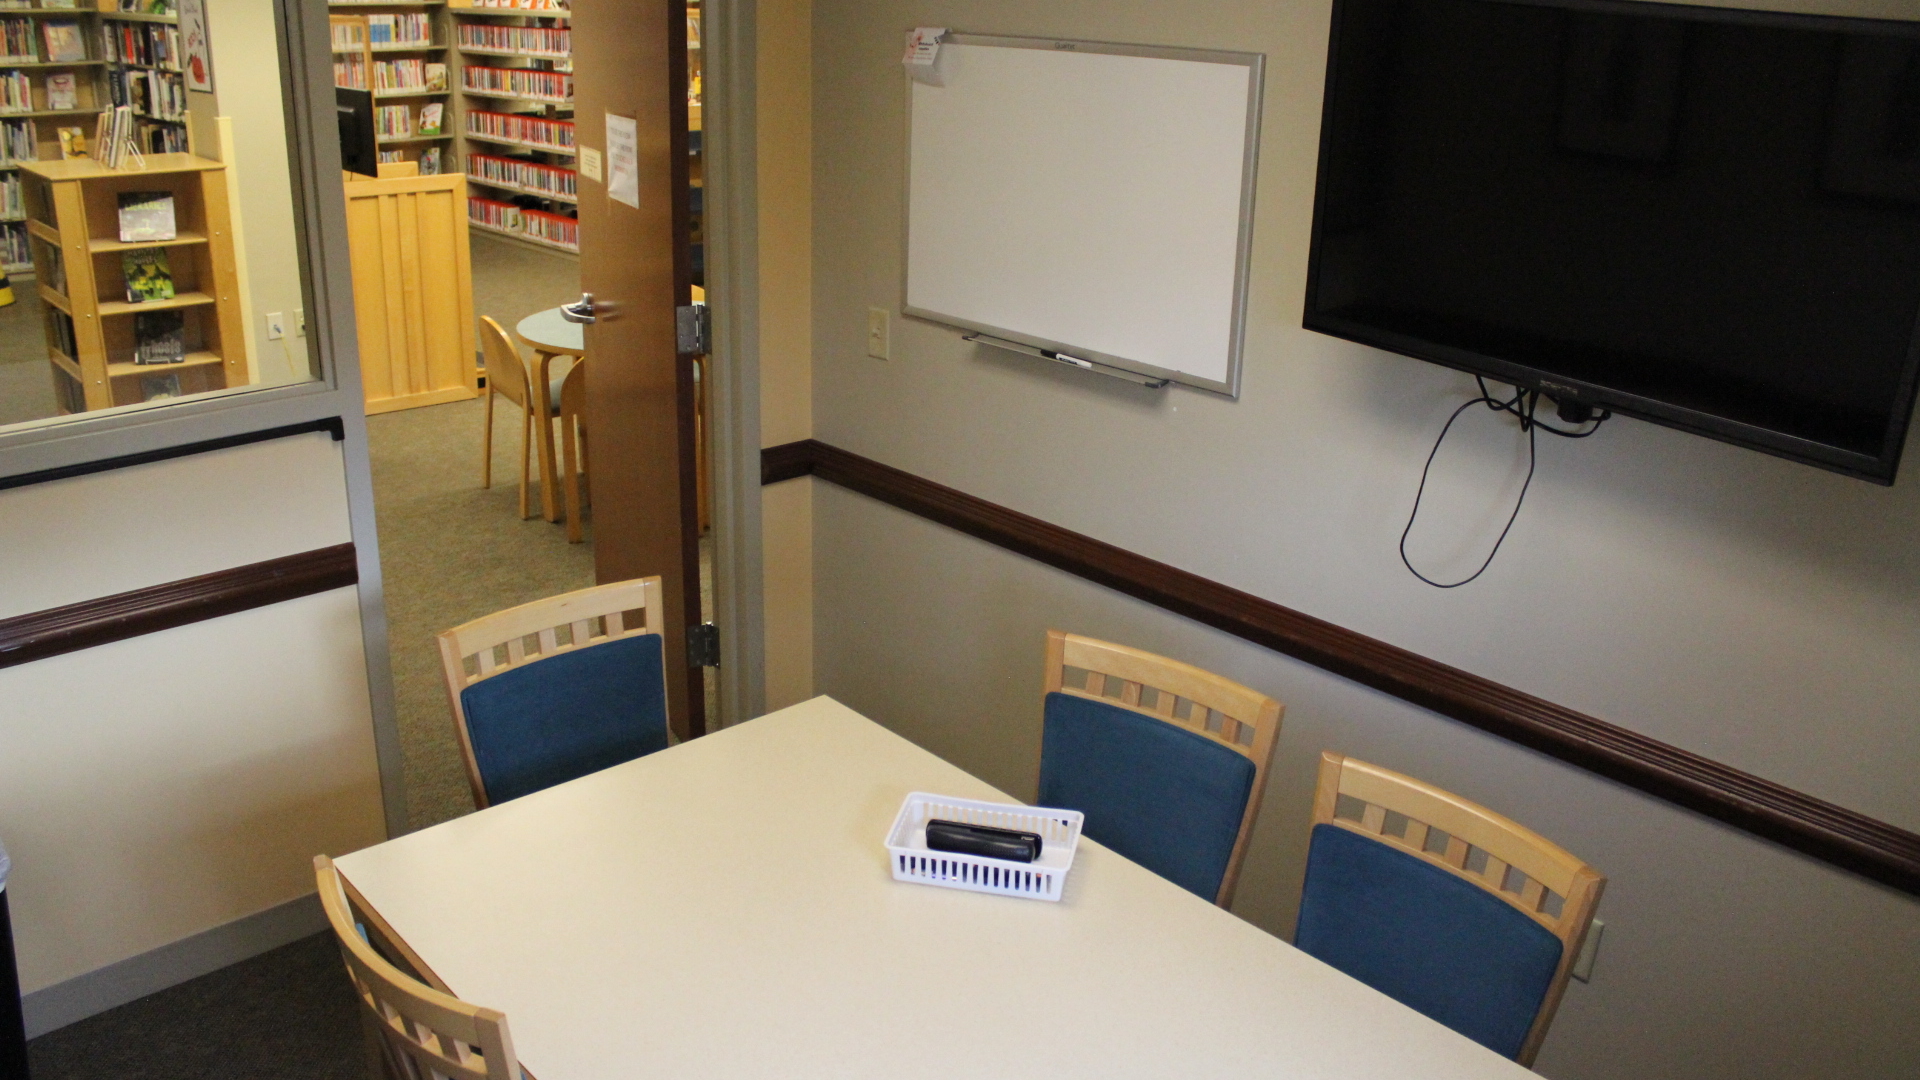 Study room B, with table and chairs, wall-mounted television, and dry-erase whiteboard